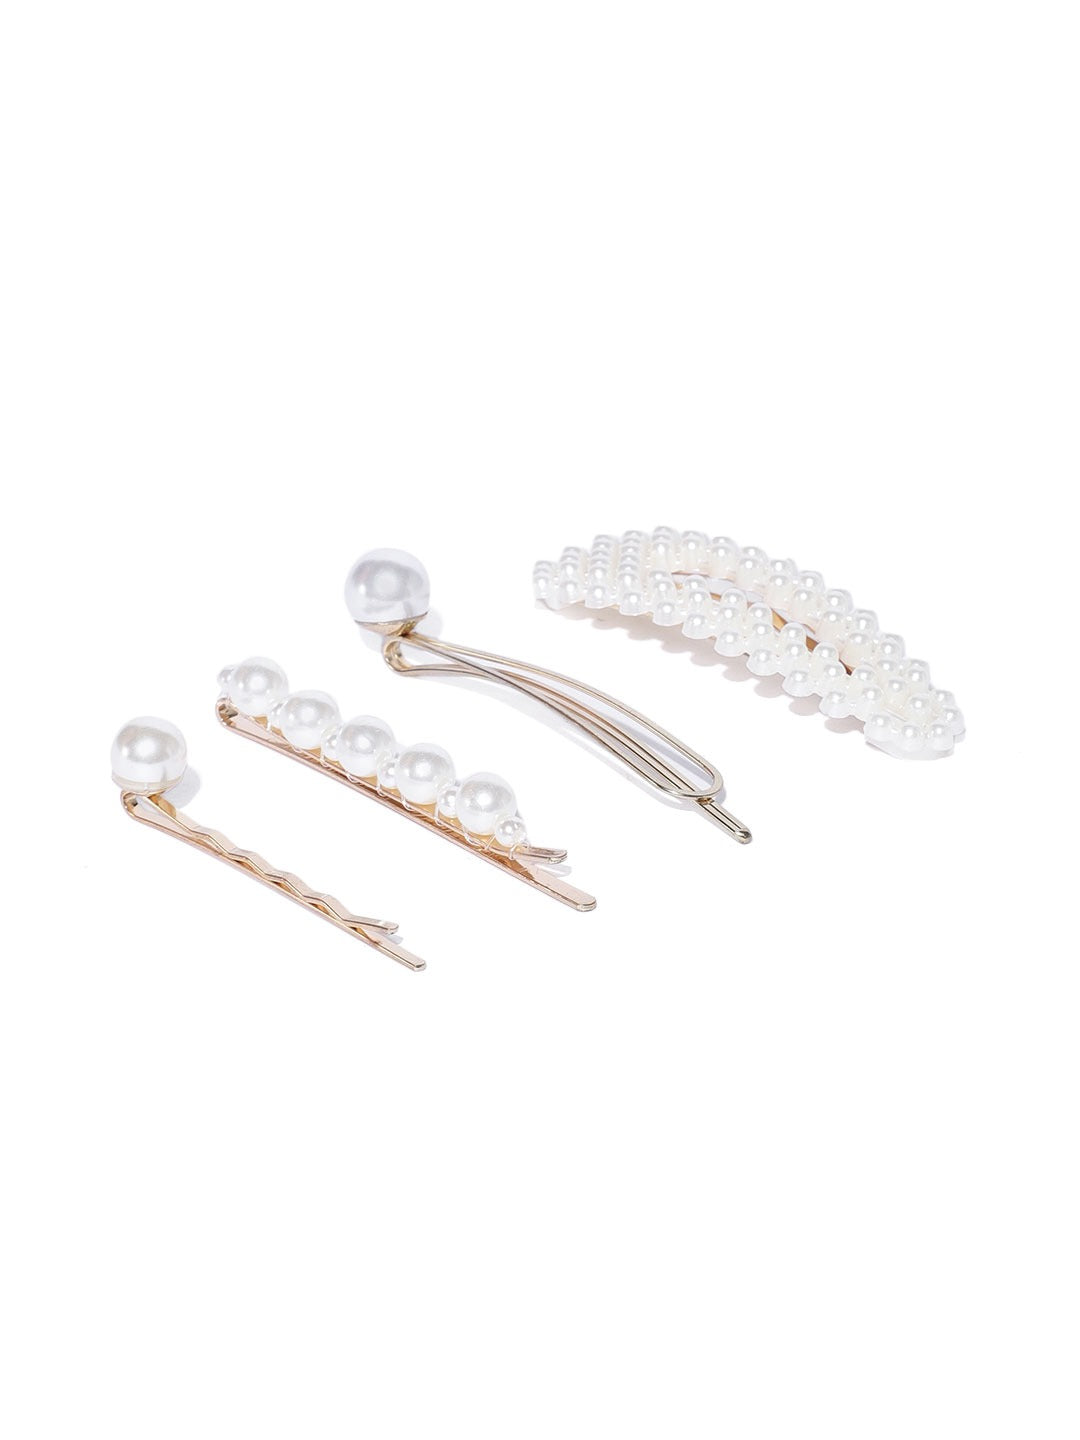 Blueberry set of 4 pearl embellished hair clips